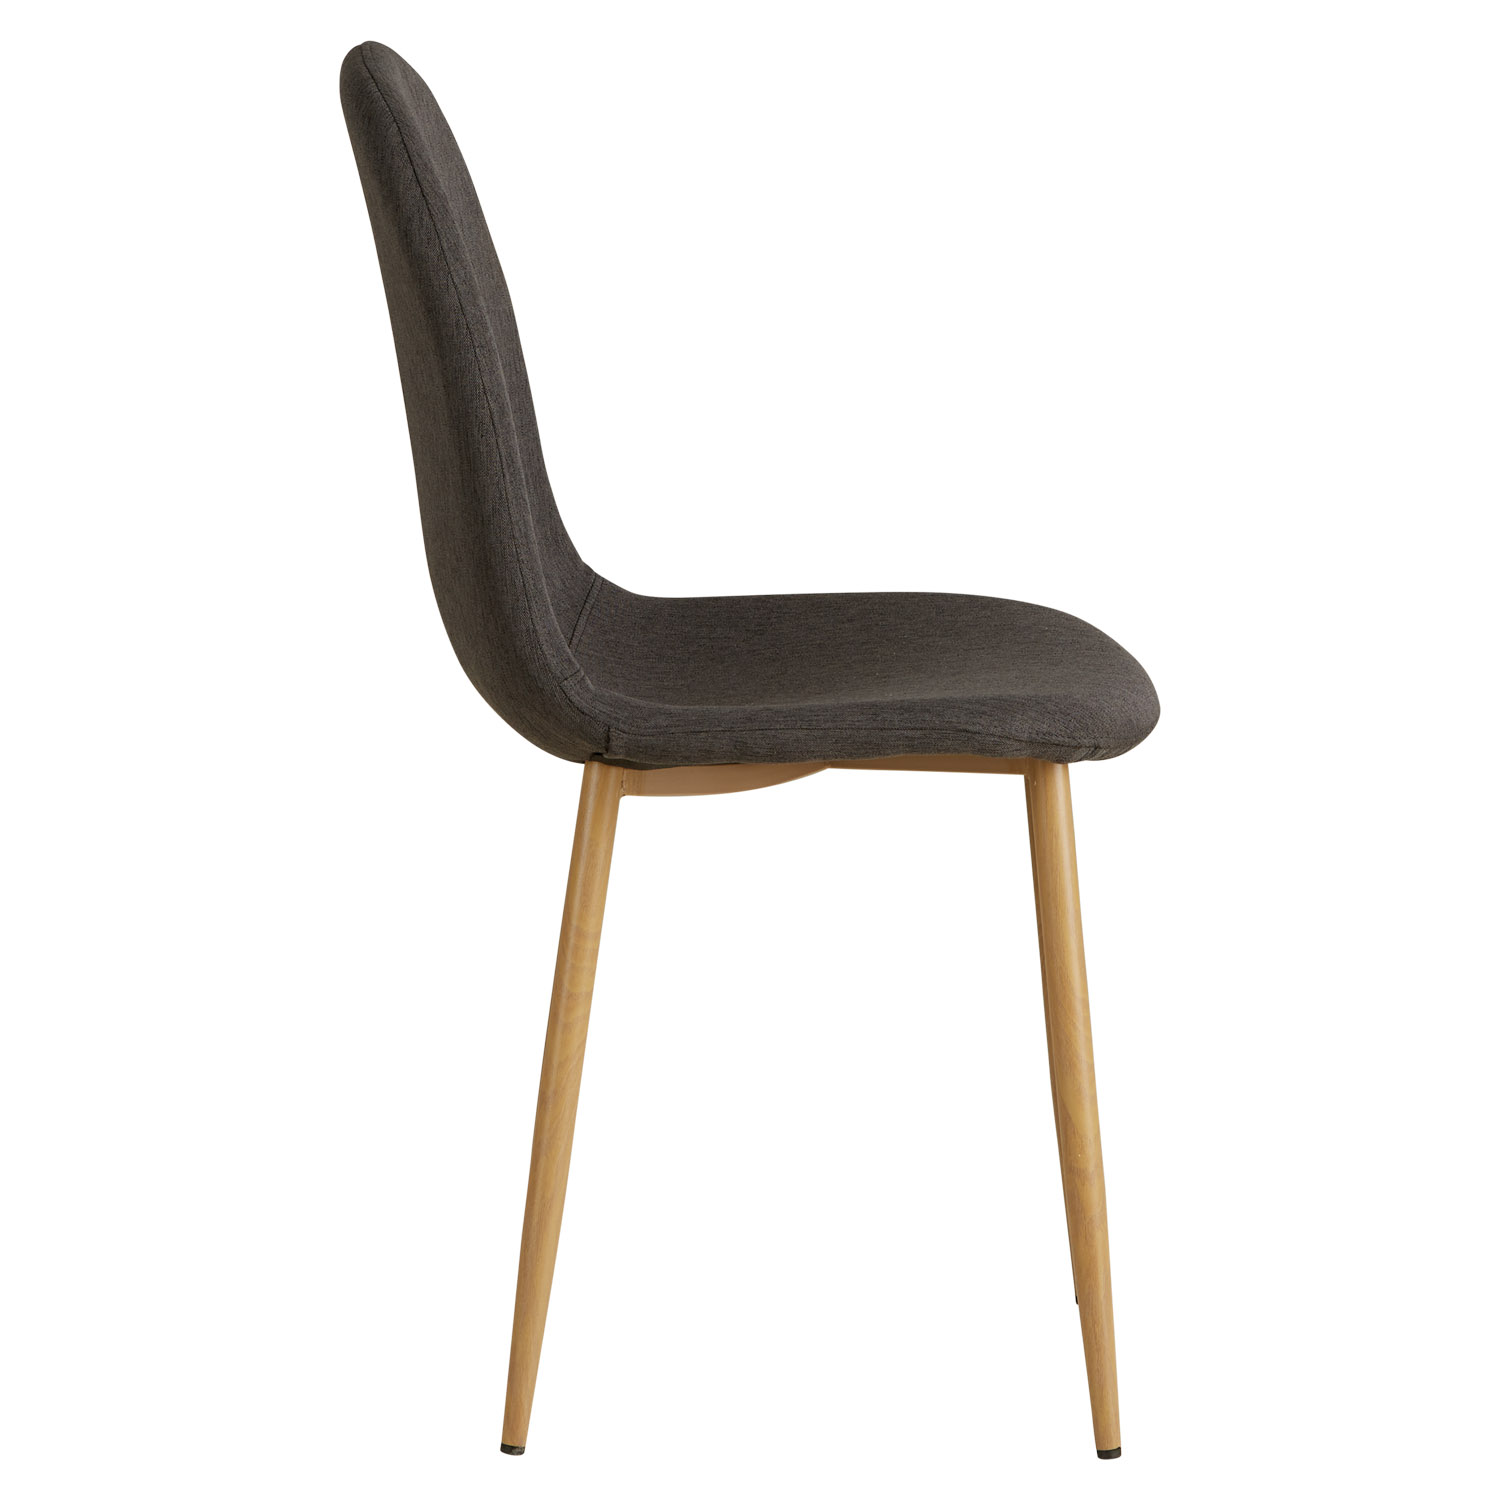 Dining Chair Egg Chair Anthracite Armchair Dining Room Chair Upholstered Chair Eames Chair Kitchen Chair